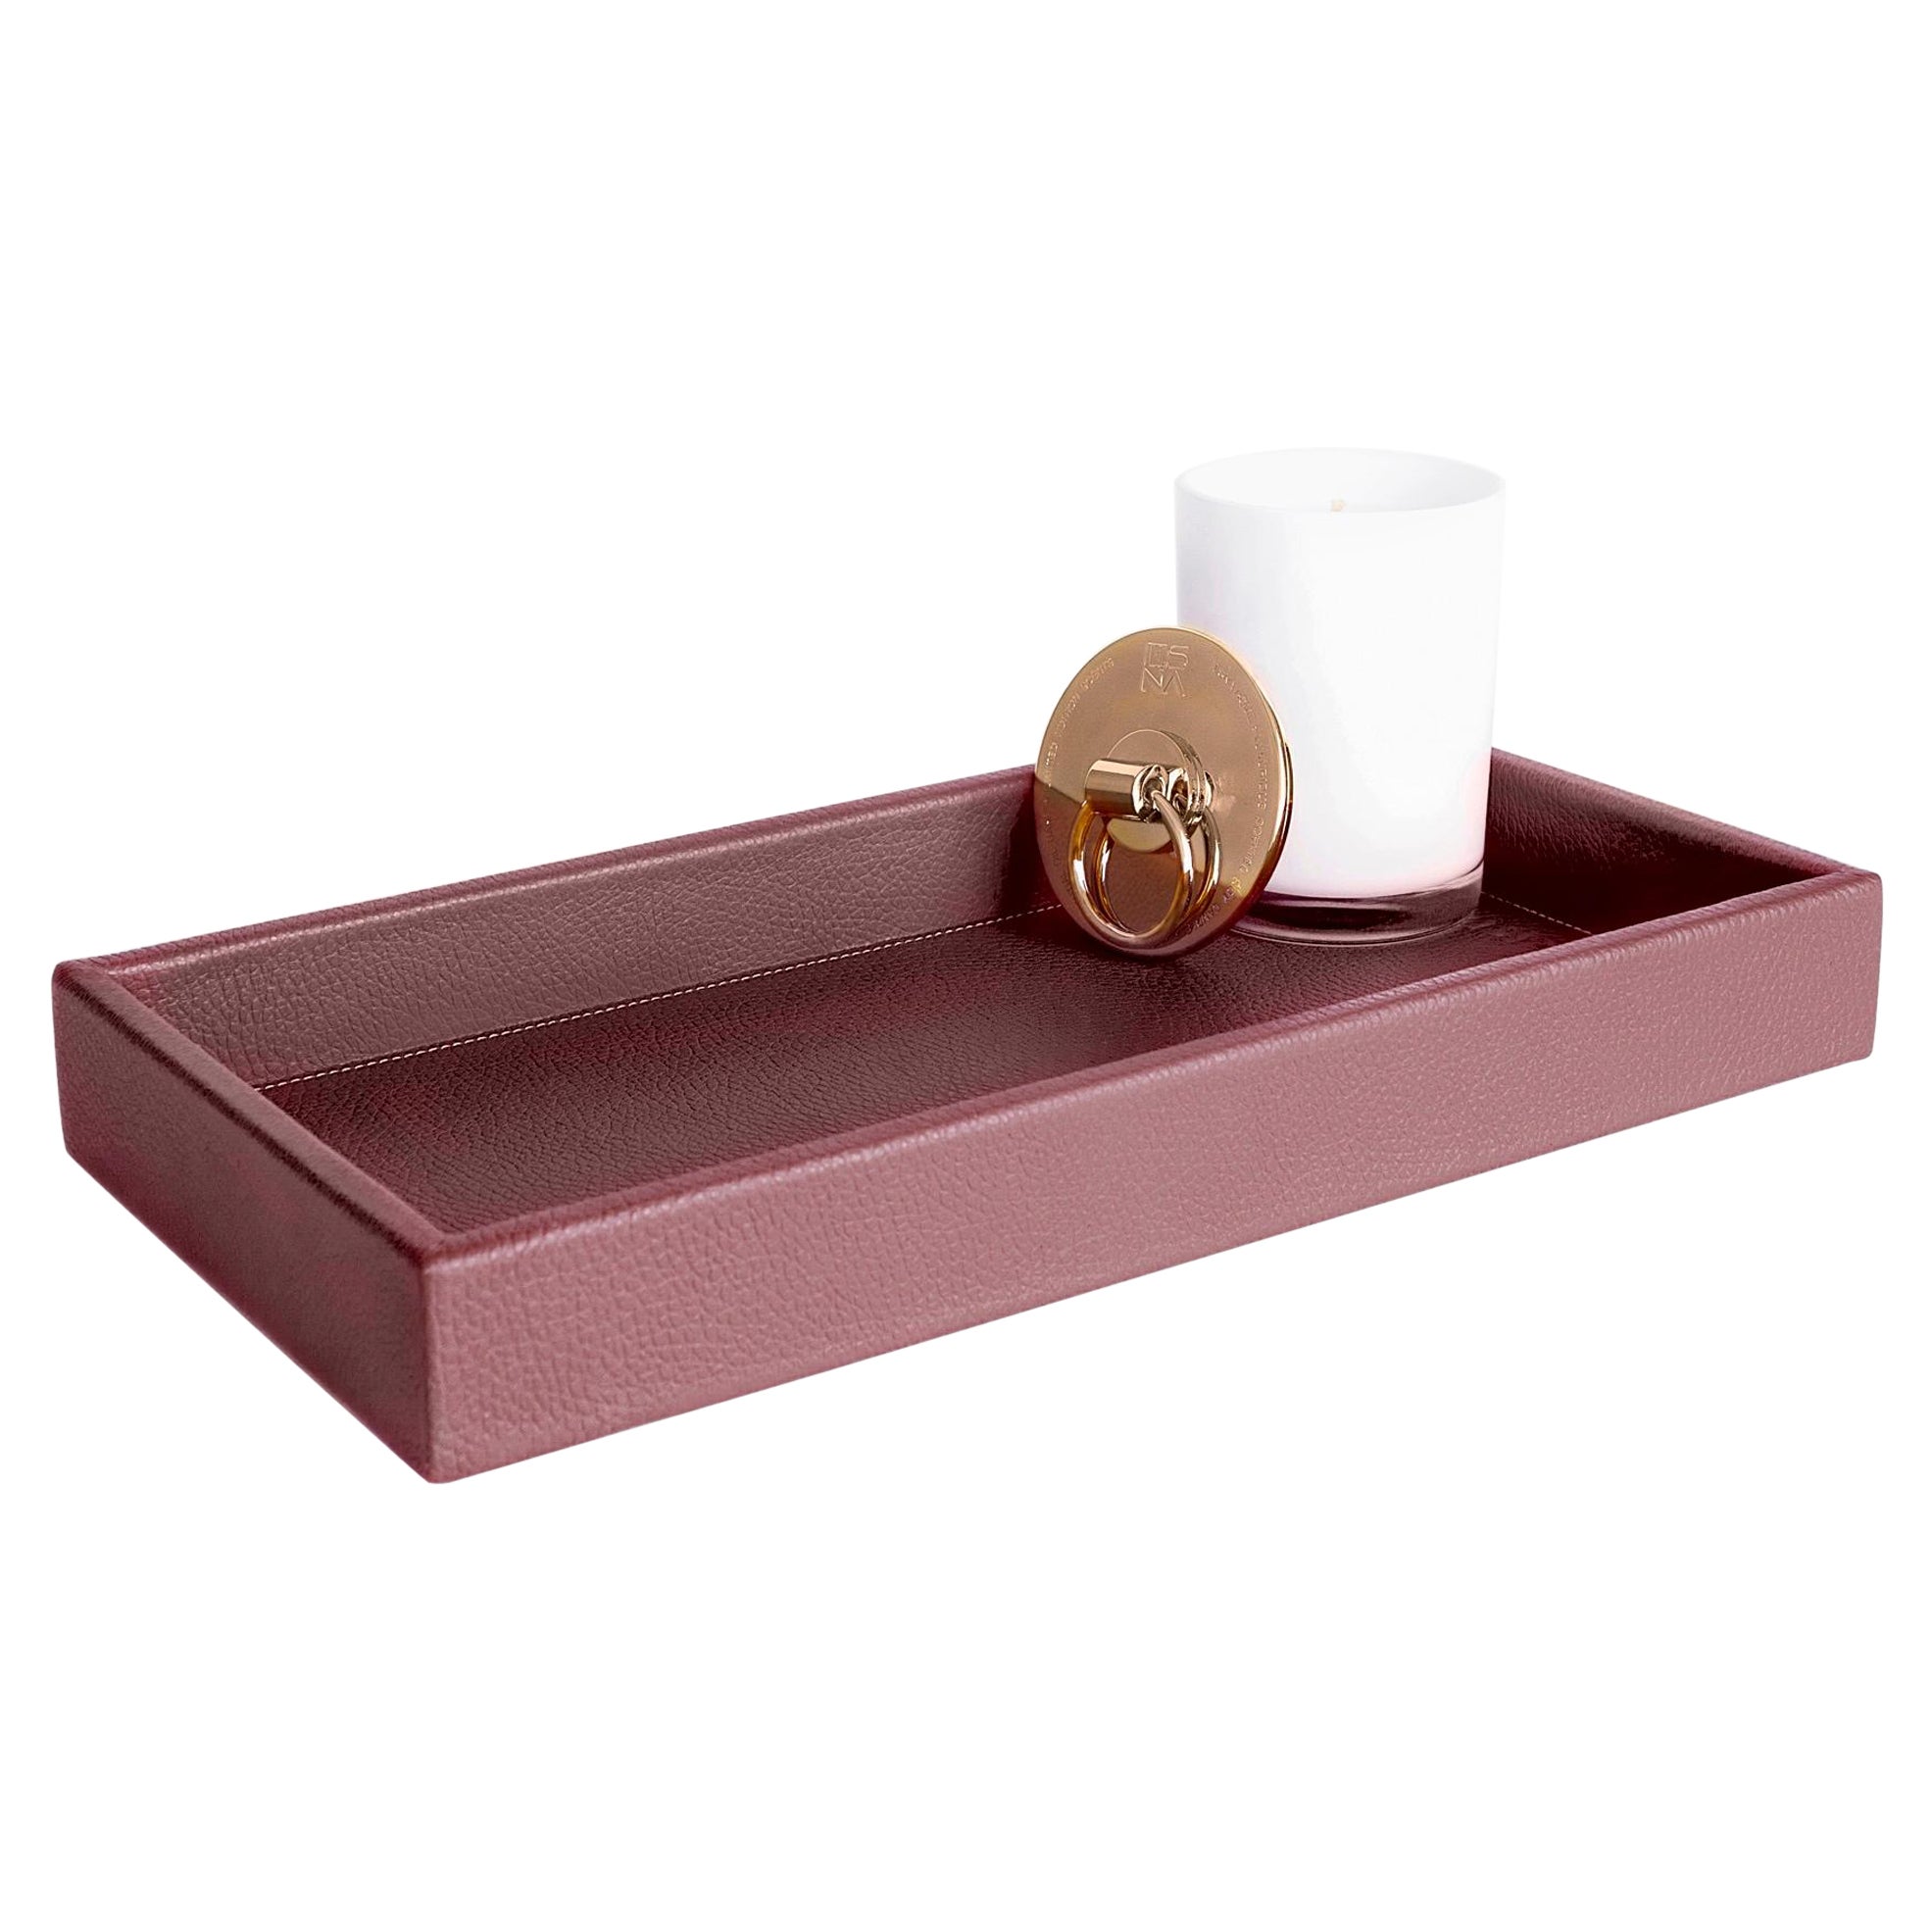 Leather Tray, Medium A Rectangular Tray - Handmade in Brazil - Color: Wine For Sale